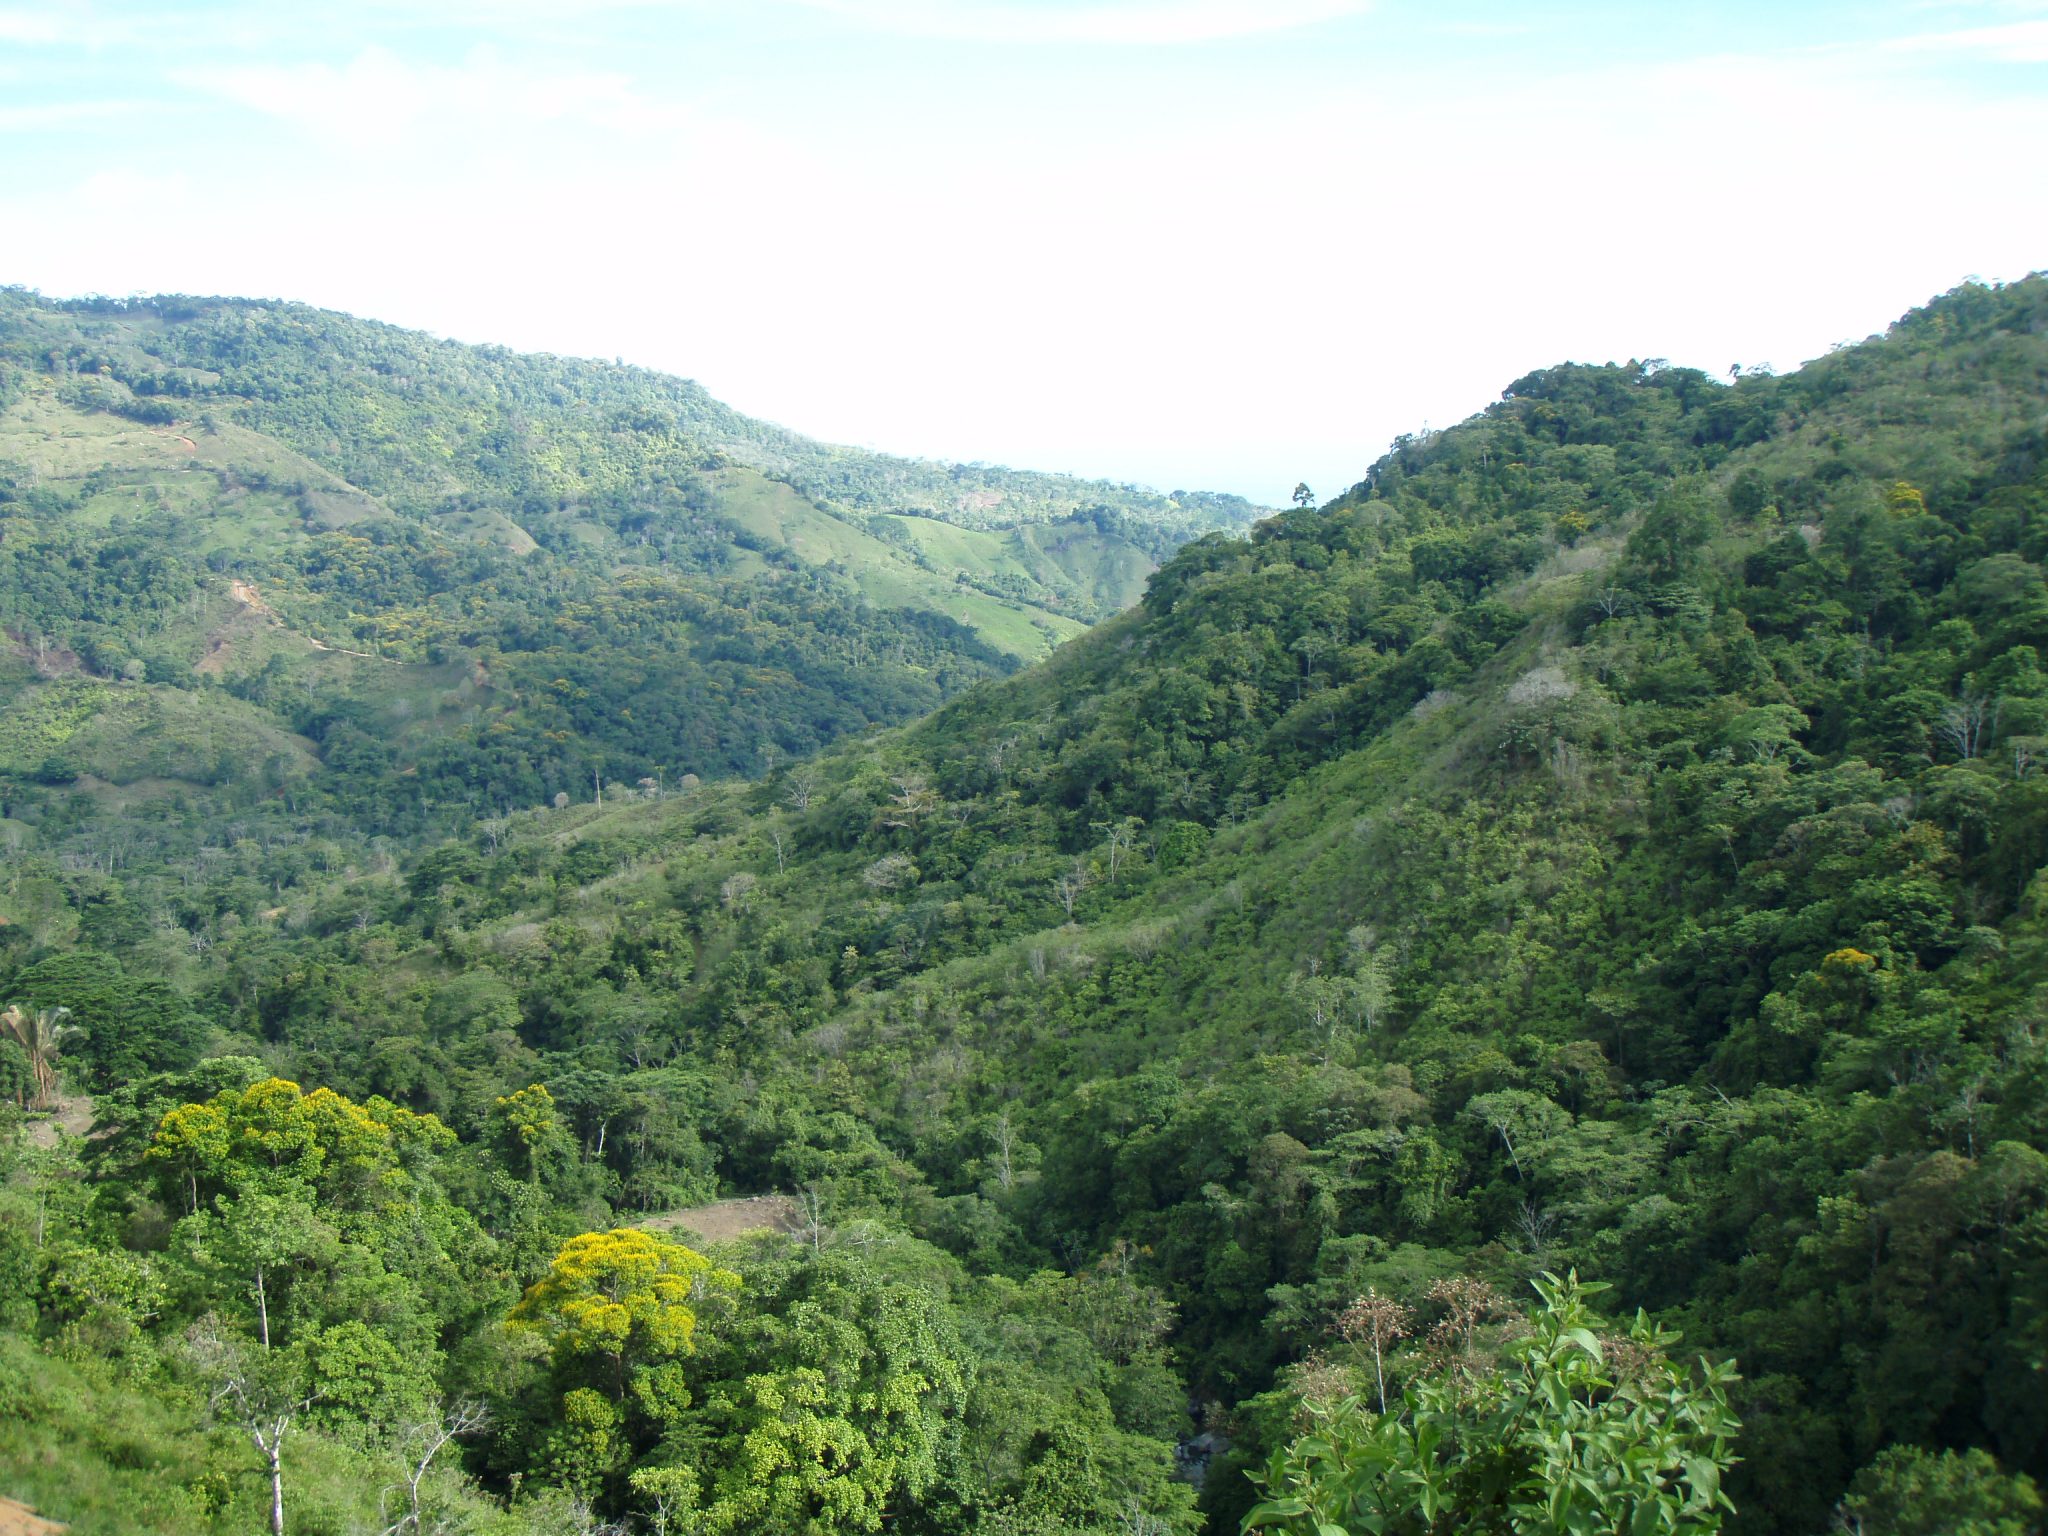 Ficheiro:View to steep forested mountain area on Mt Manucoco